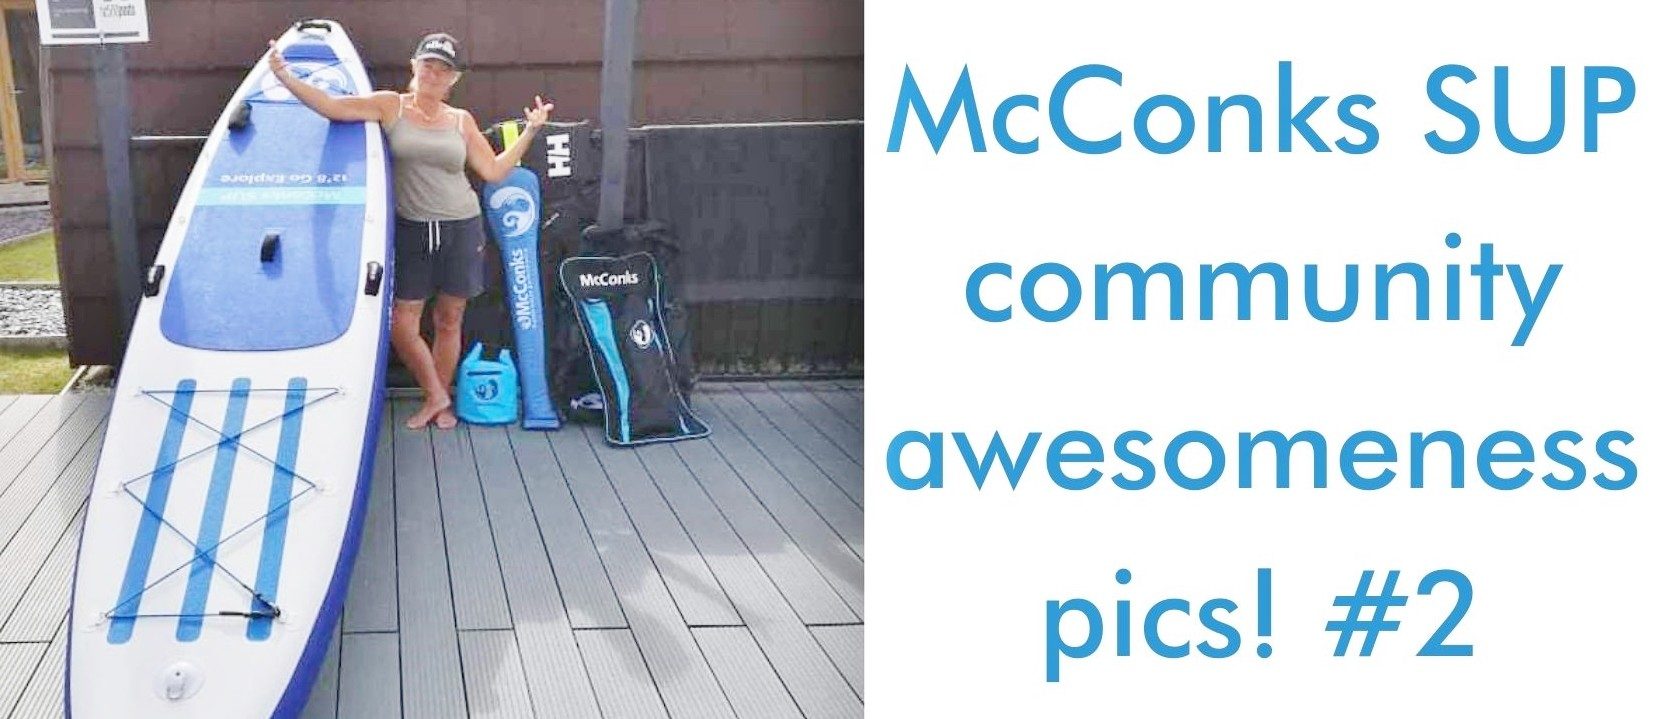 You are currently viewing McConks SUP community awesomeness pics! #2